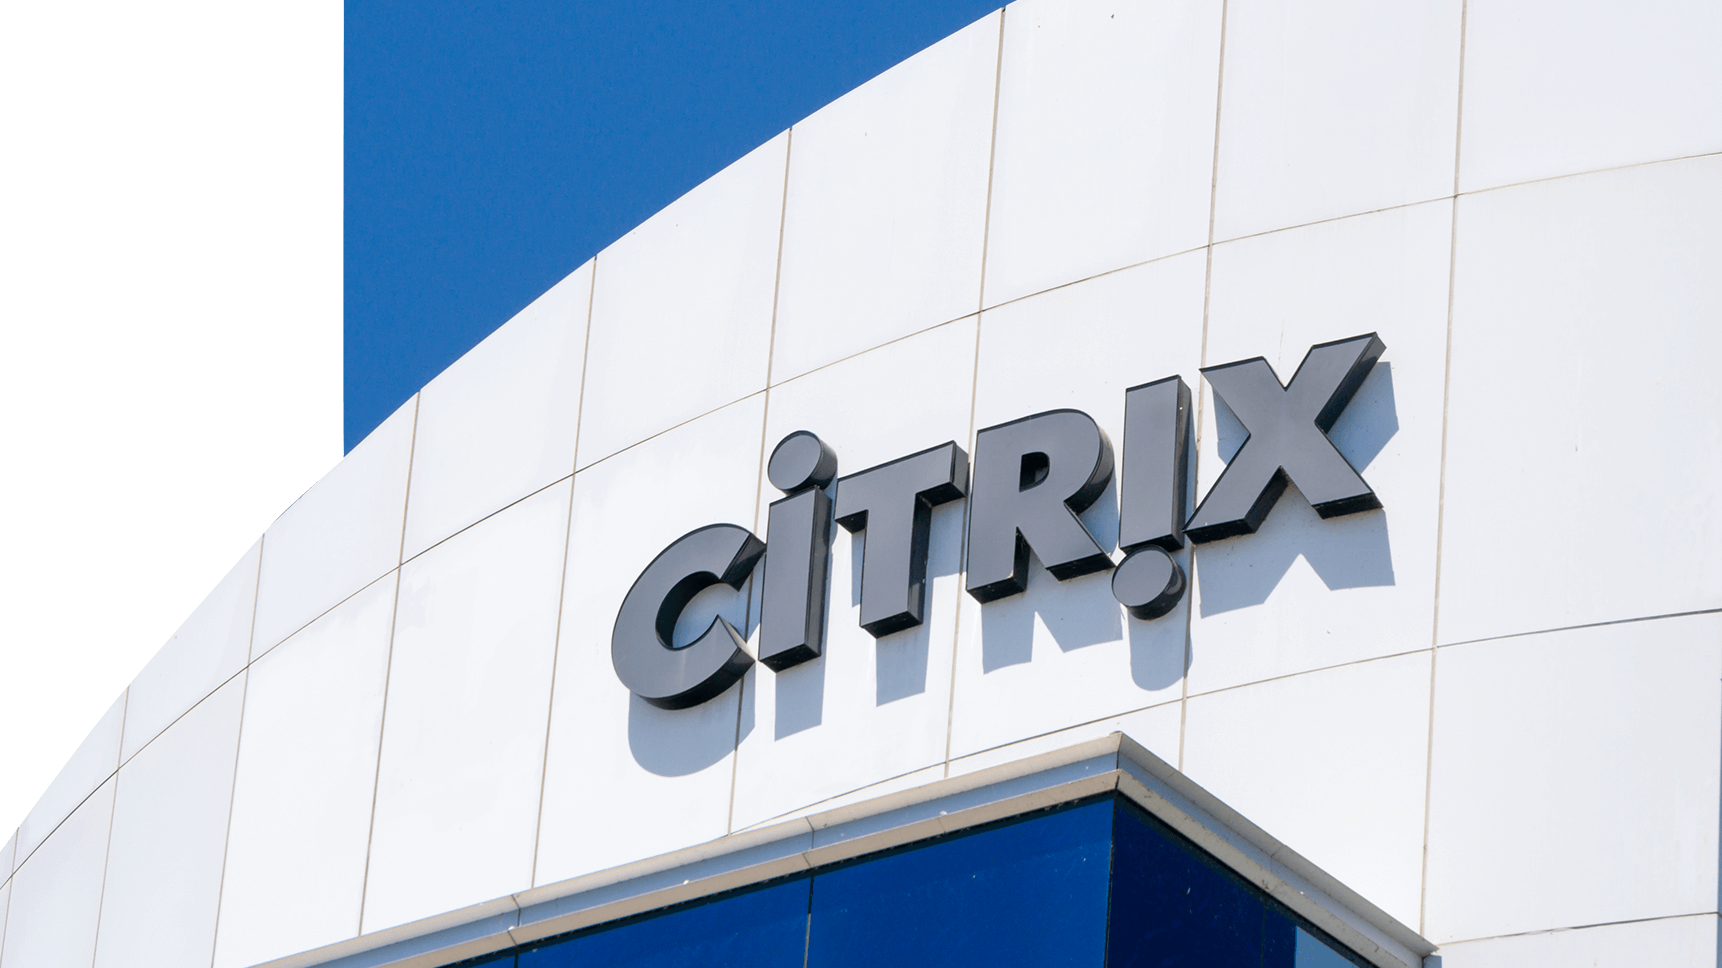 Citrix corporate building and logo. Citrix Systems, Inc. is an American multinational software company